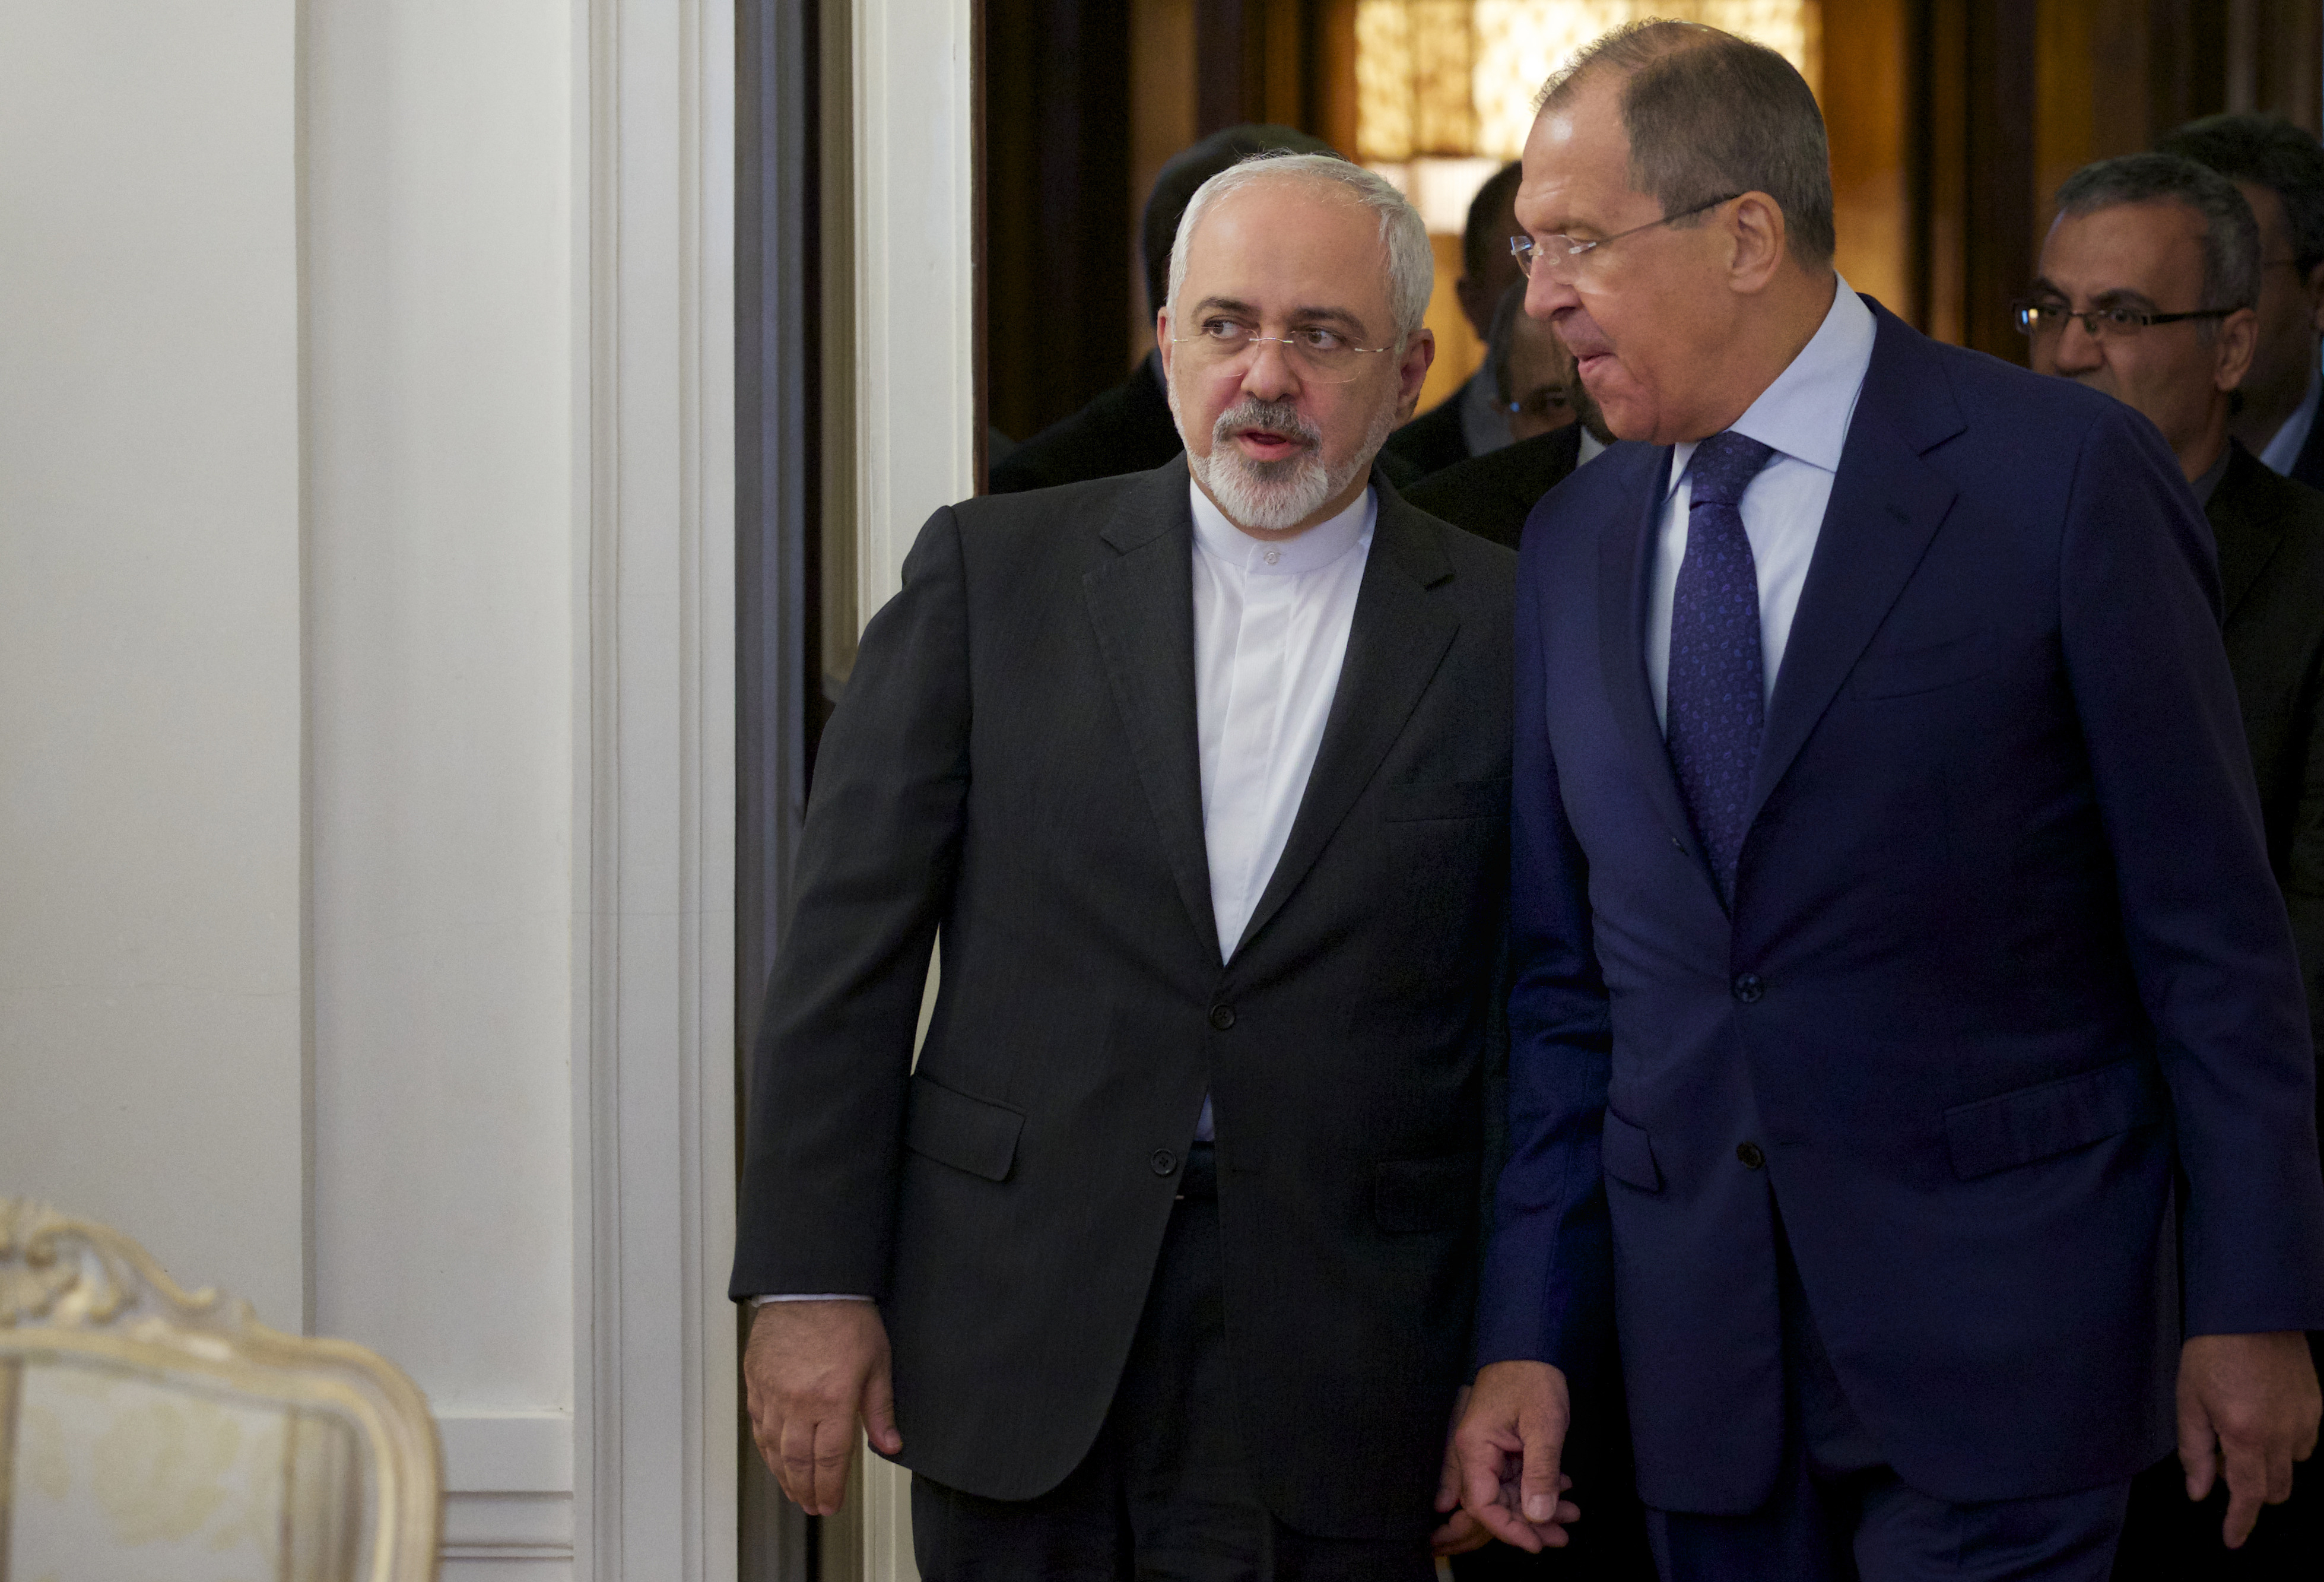 Iranian Foreign Minister Mohammad Javad Zarif and his Russian counterpart Sergei Lavrov